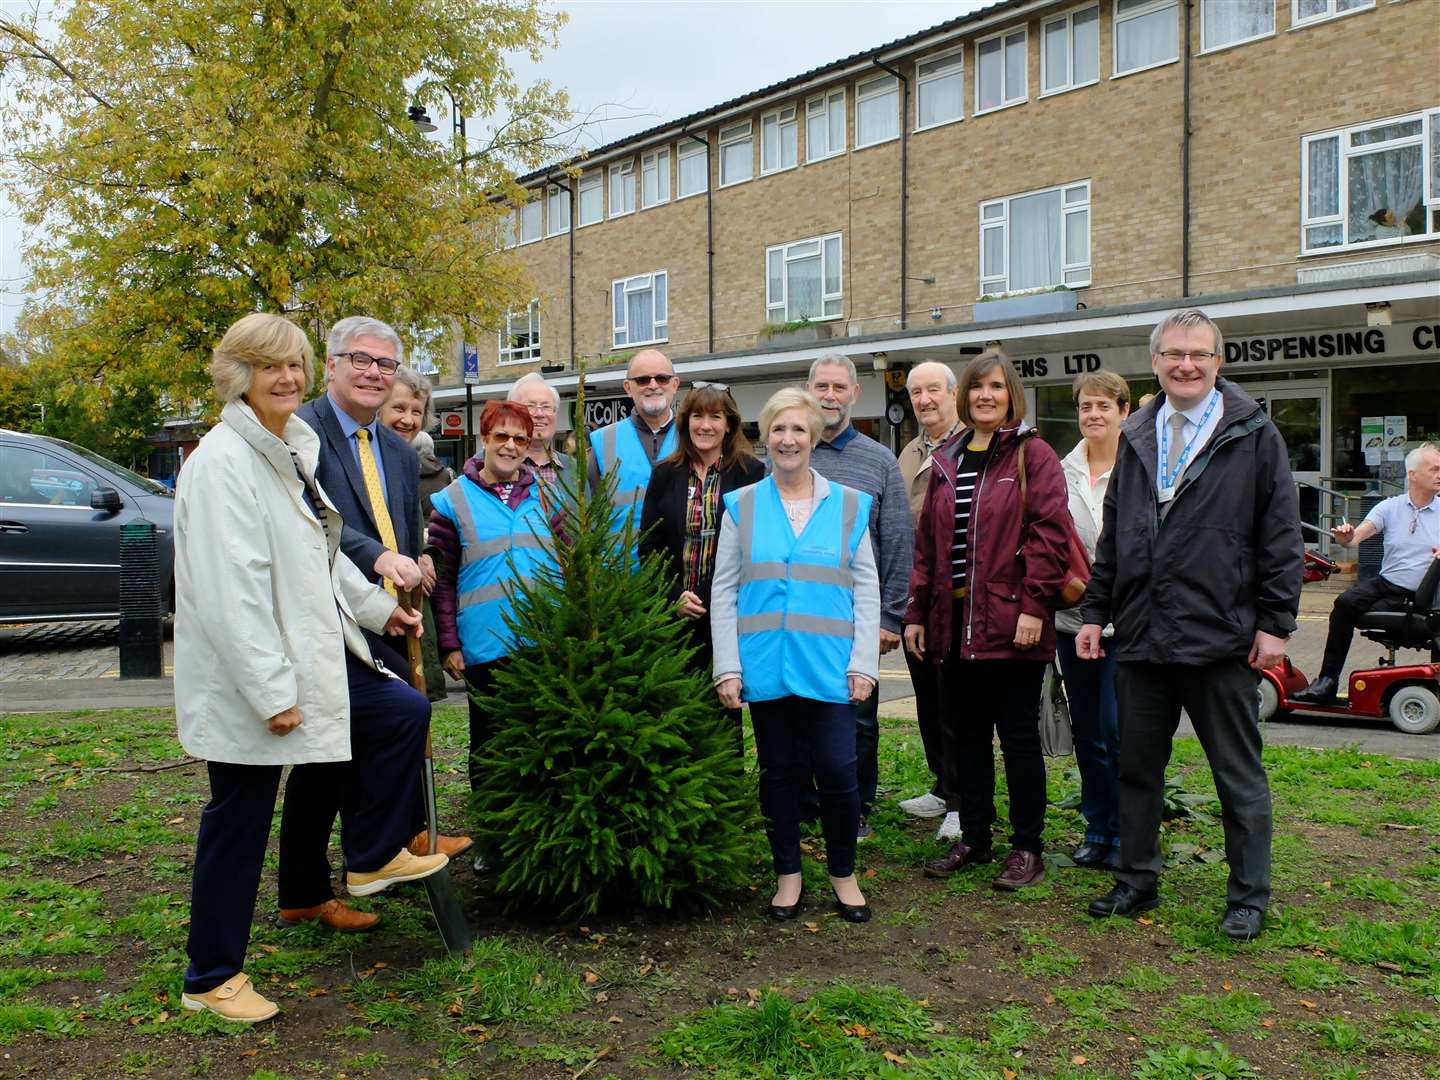 The 5ft Christmas tree donated by Rapport Housing in Martin Square, Larkfield, was returned after going missing